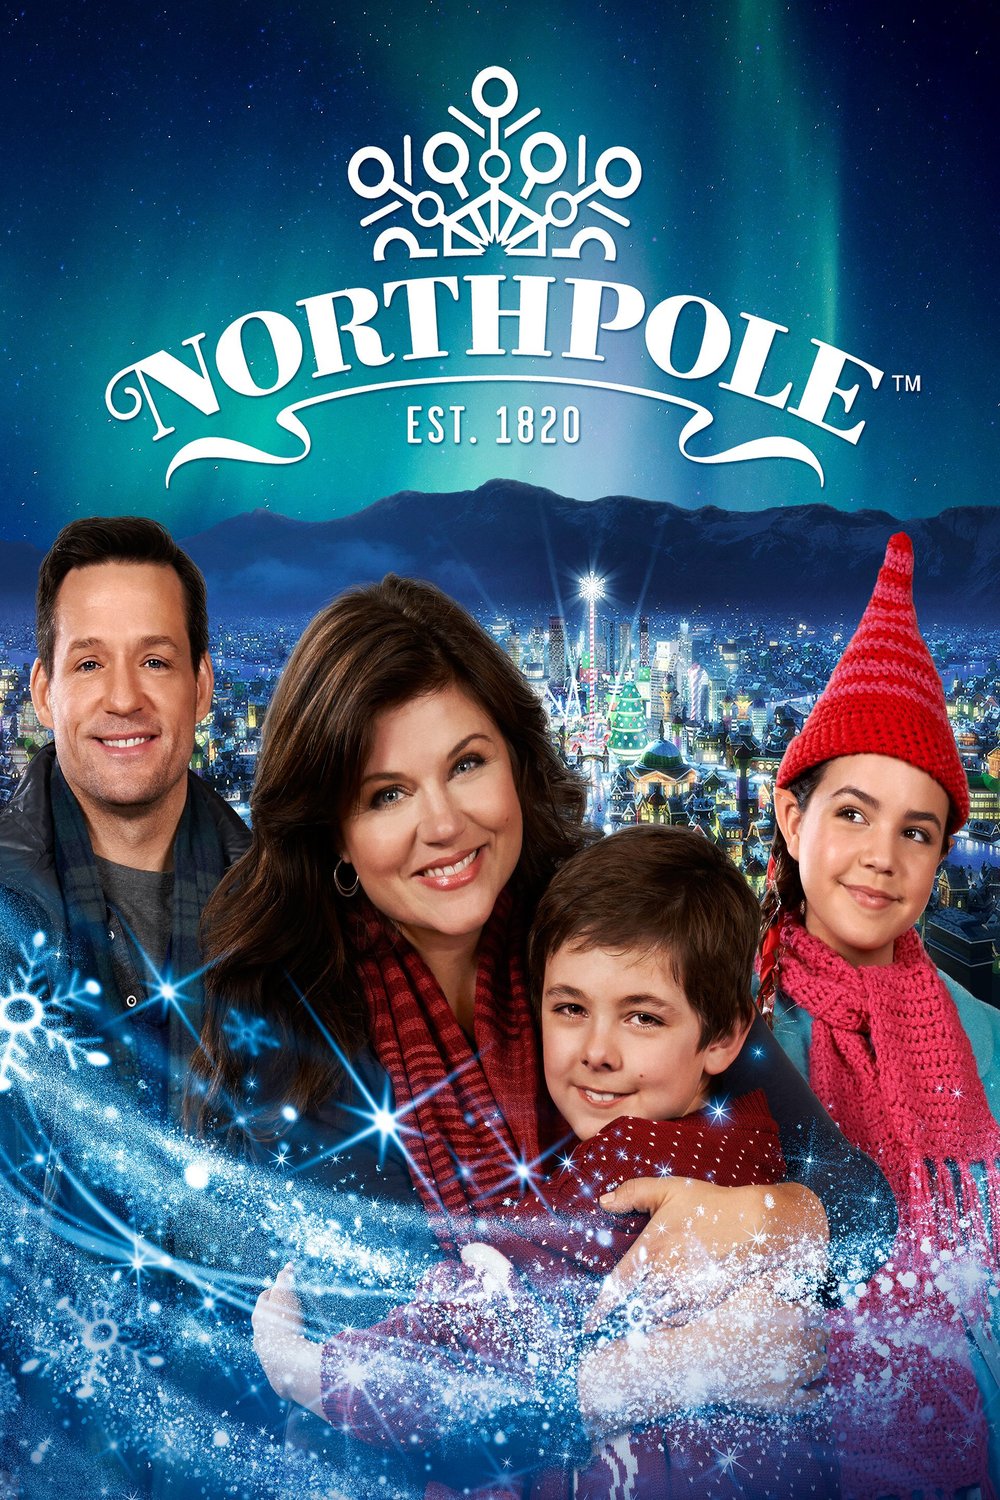 Poster of the movie Northpole